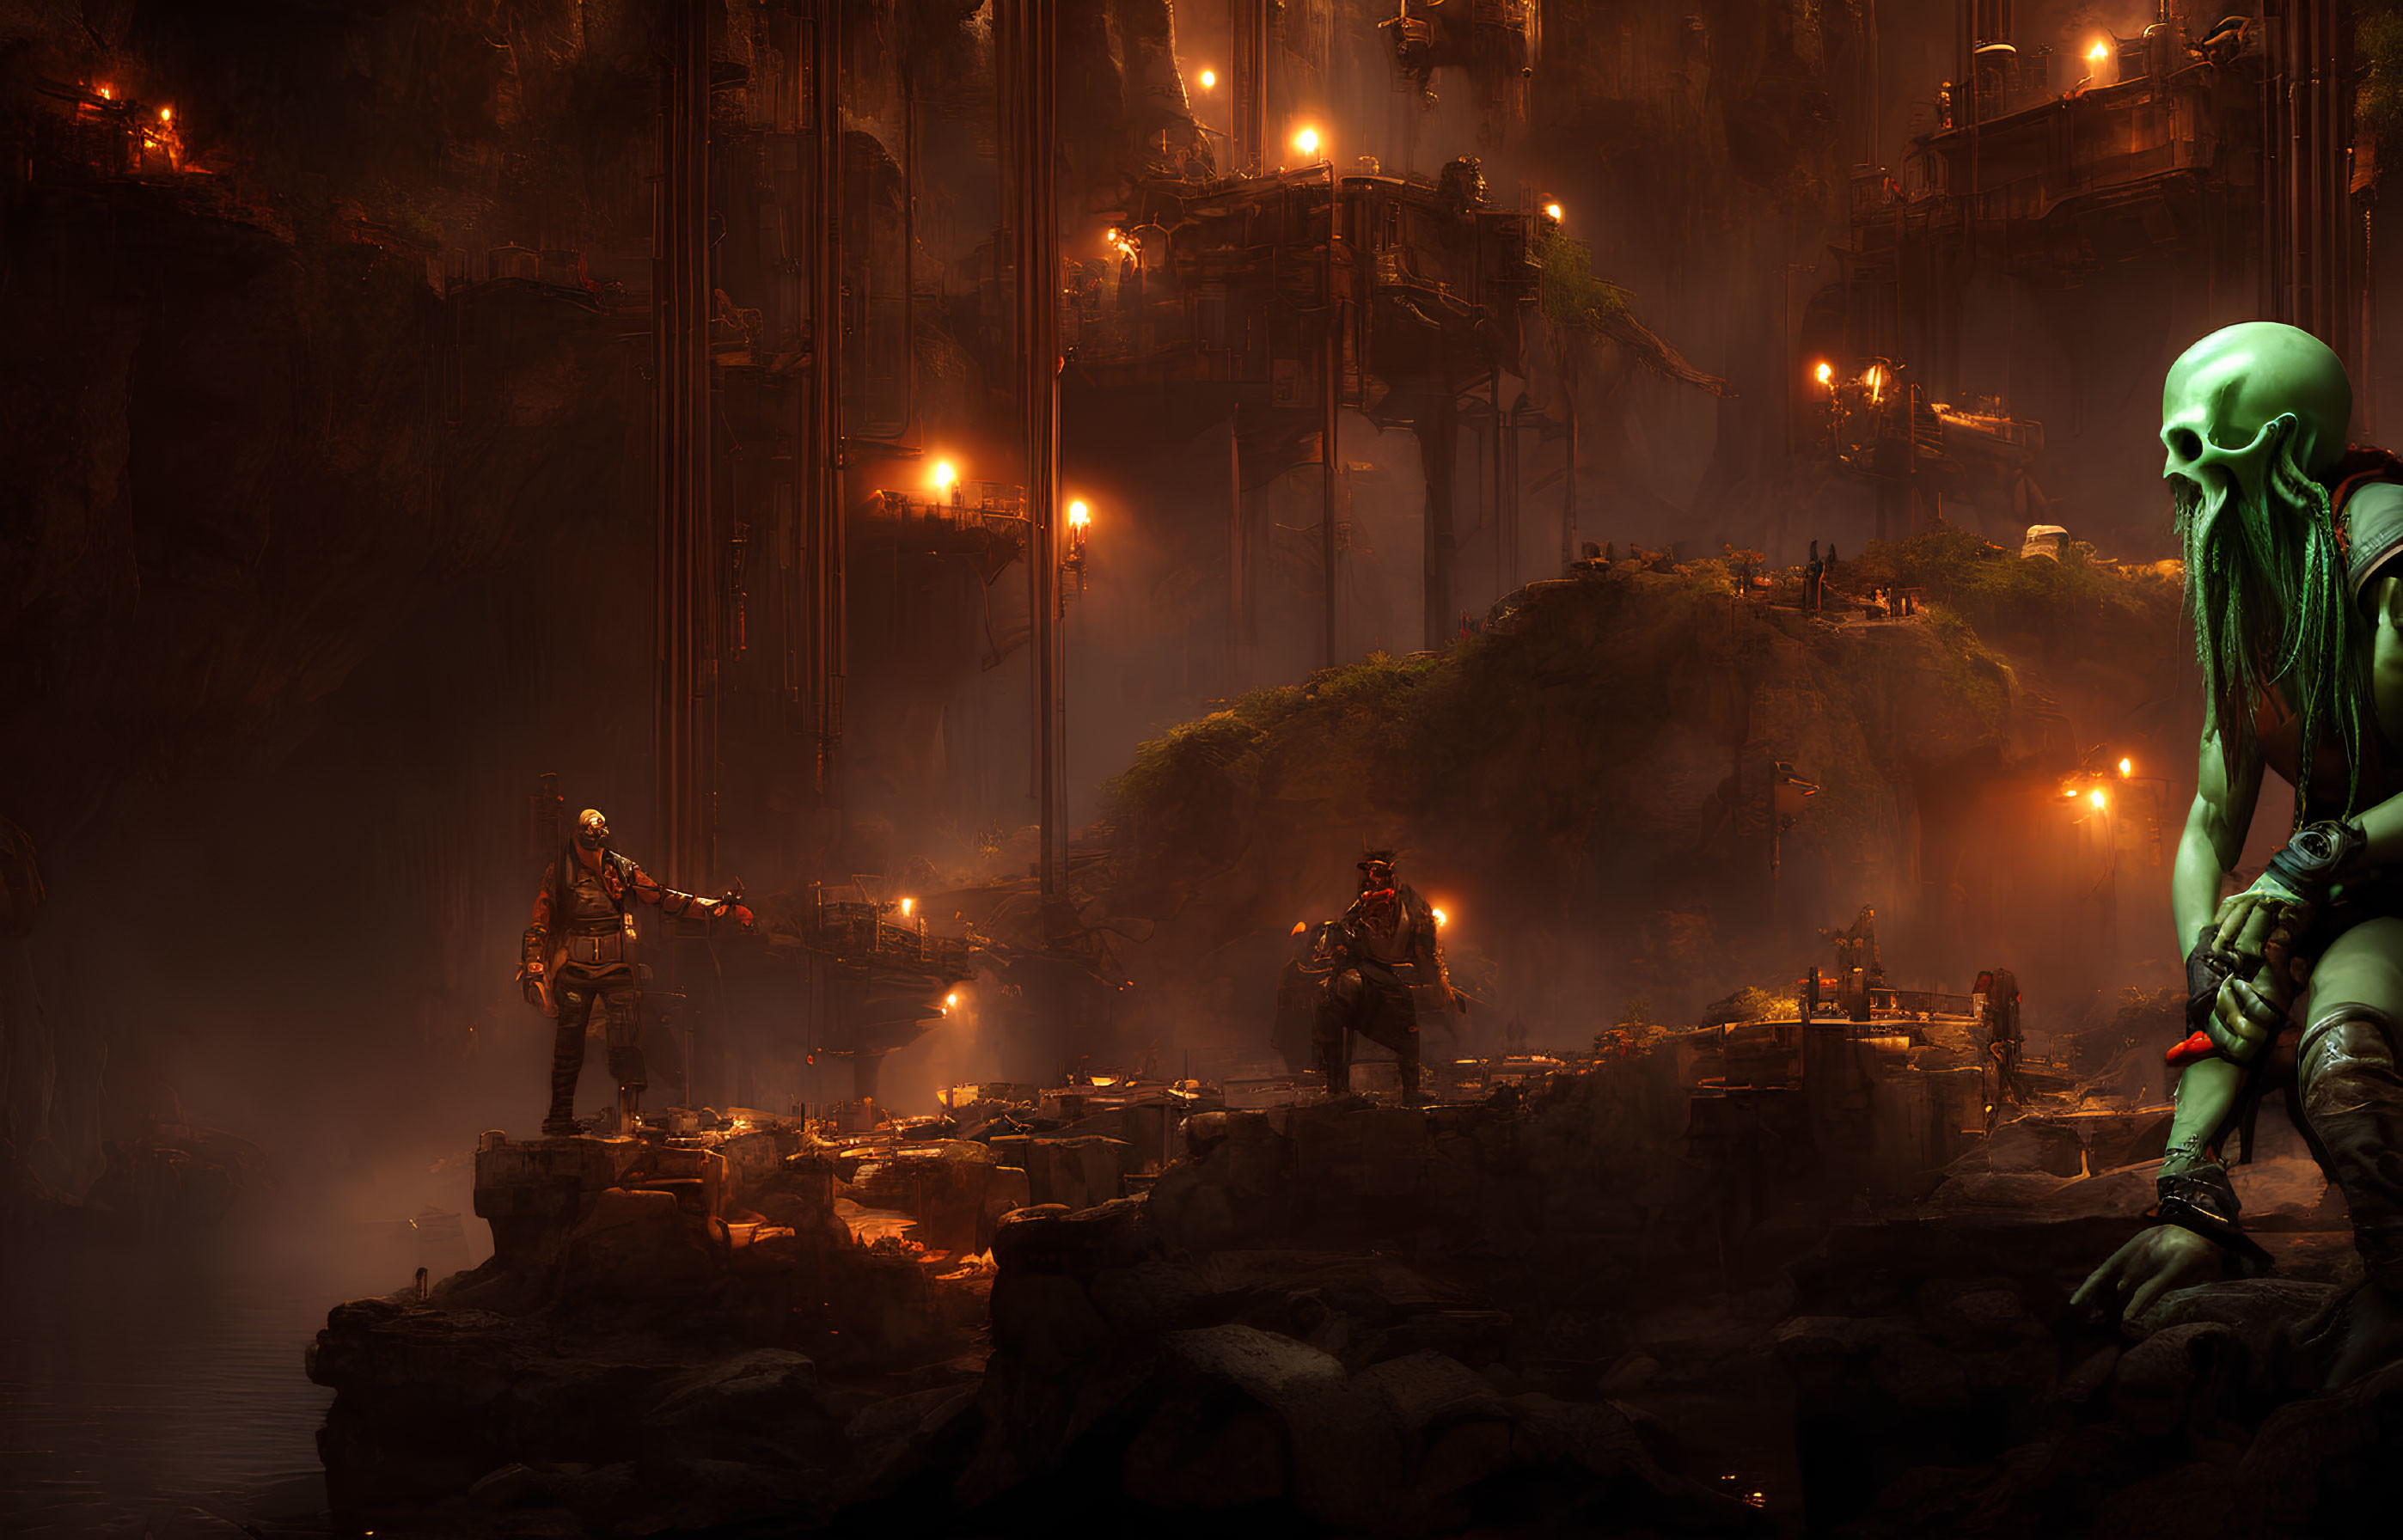 Dystopian underground landscape with armed figures, large skull, rocky terrain, and industrial structures lit by